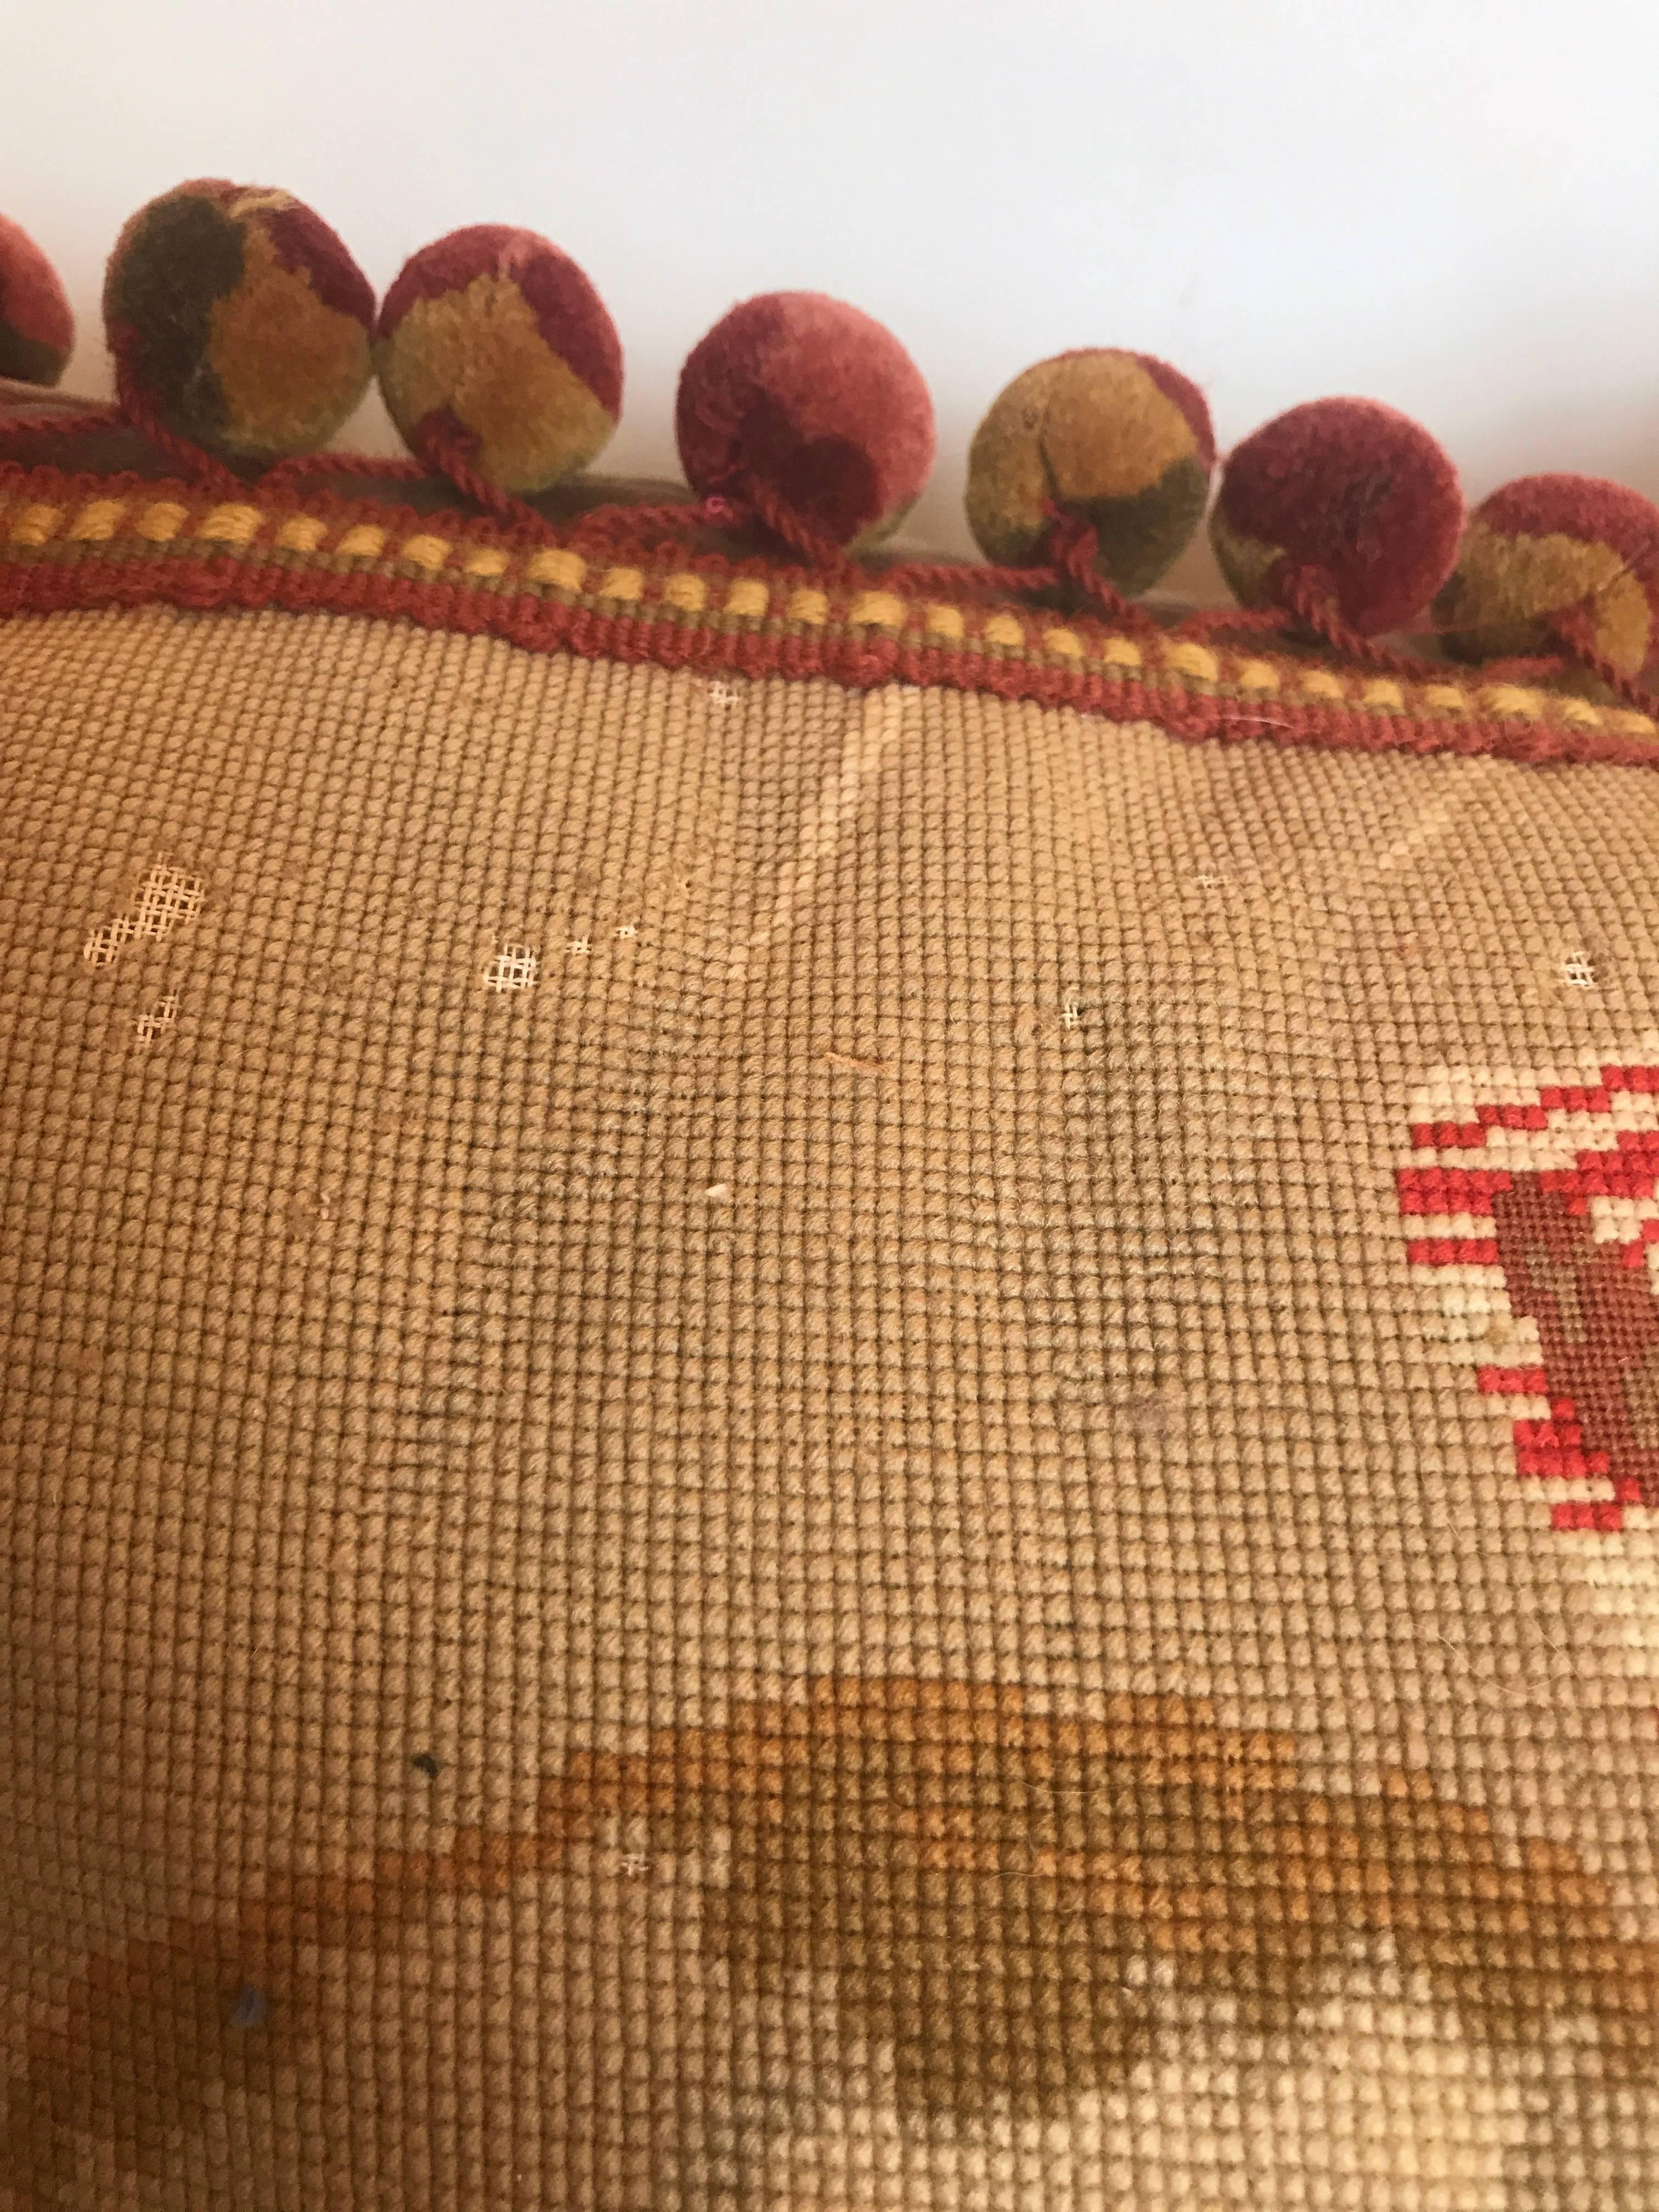 Antique European Needlepoint Pillow with Designer Wool Ball Fringe In Good Condition For Sale In Glen Ellyn, IL